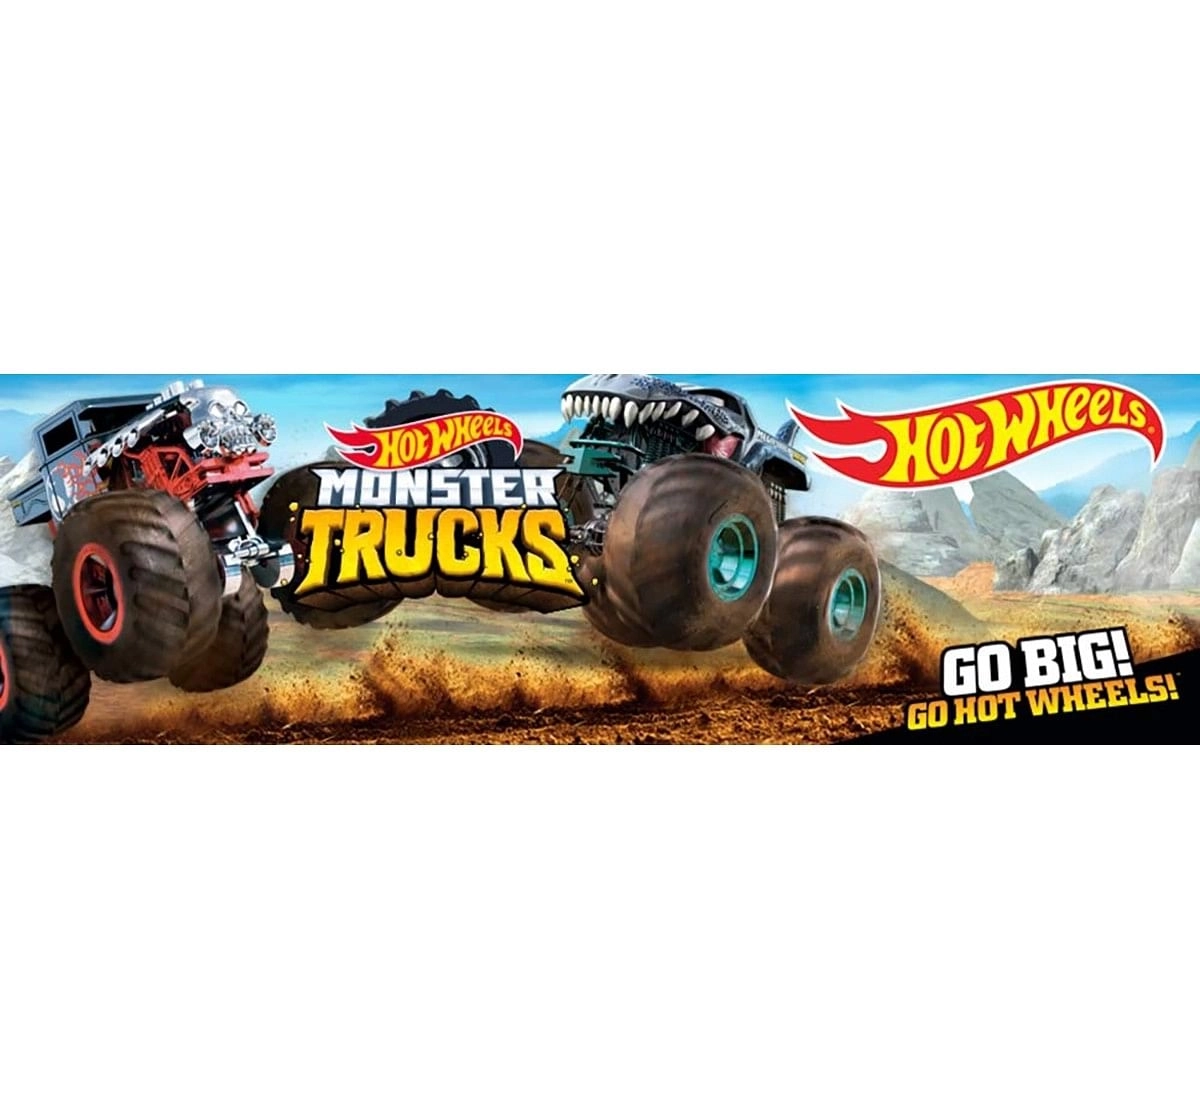 Hot Wheels 1:24 Monster Trucks Vehicles for Kids age 3Y+, Assorted